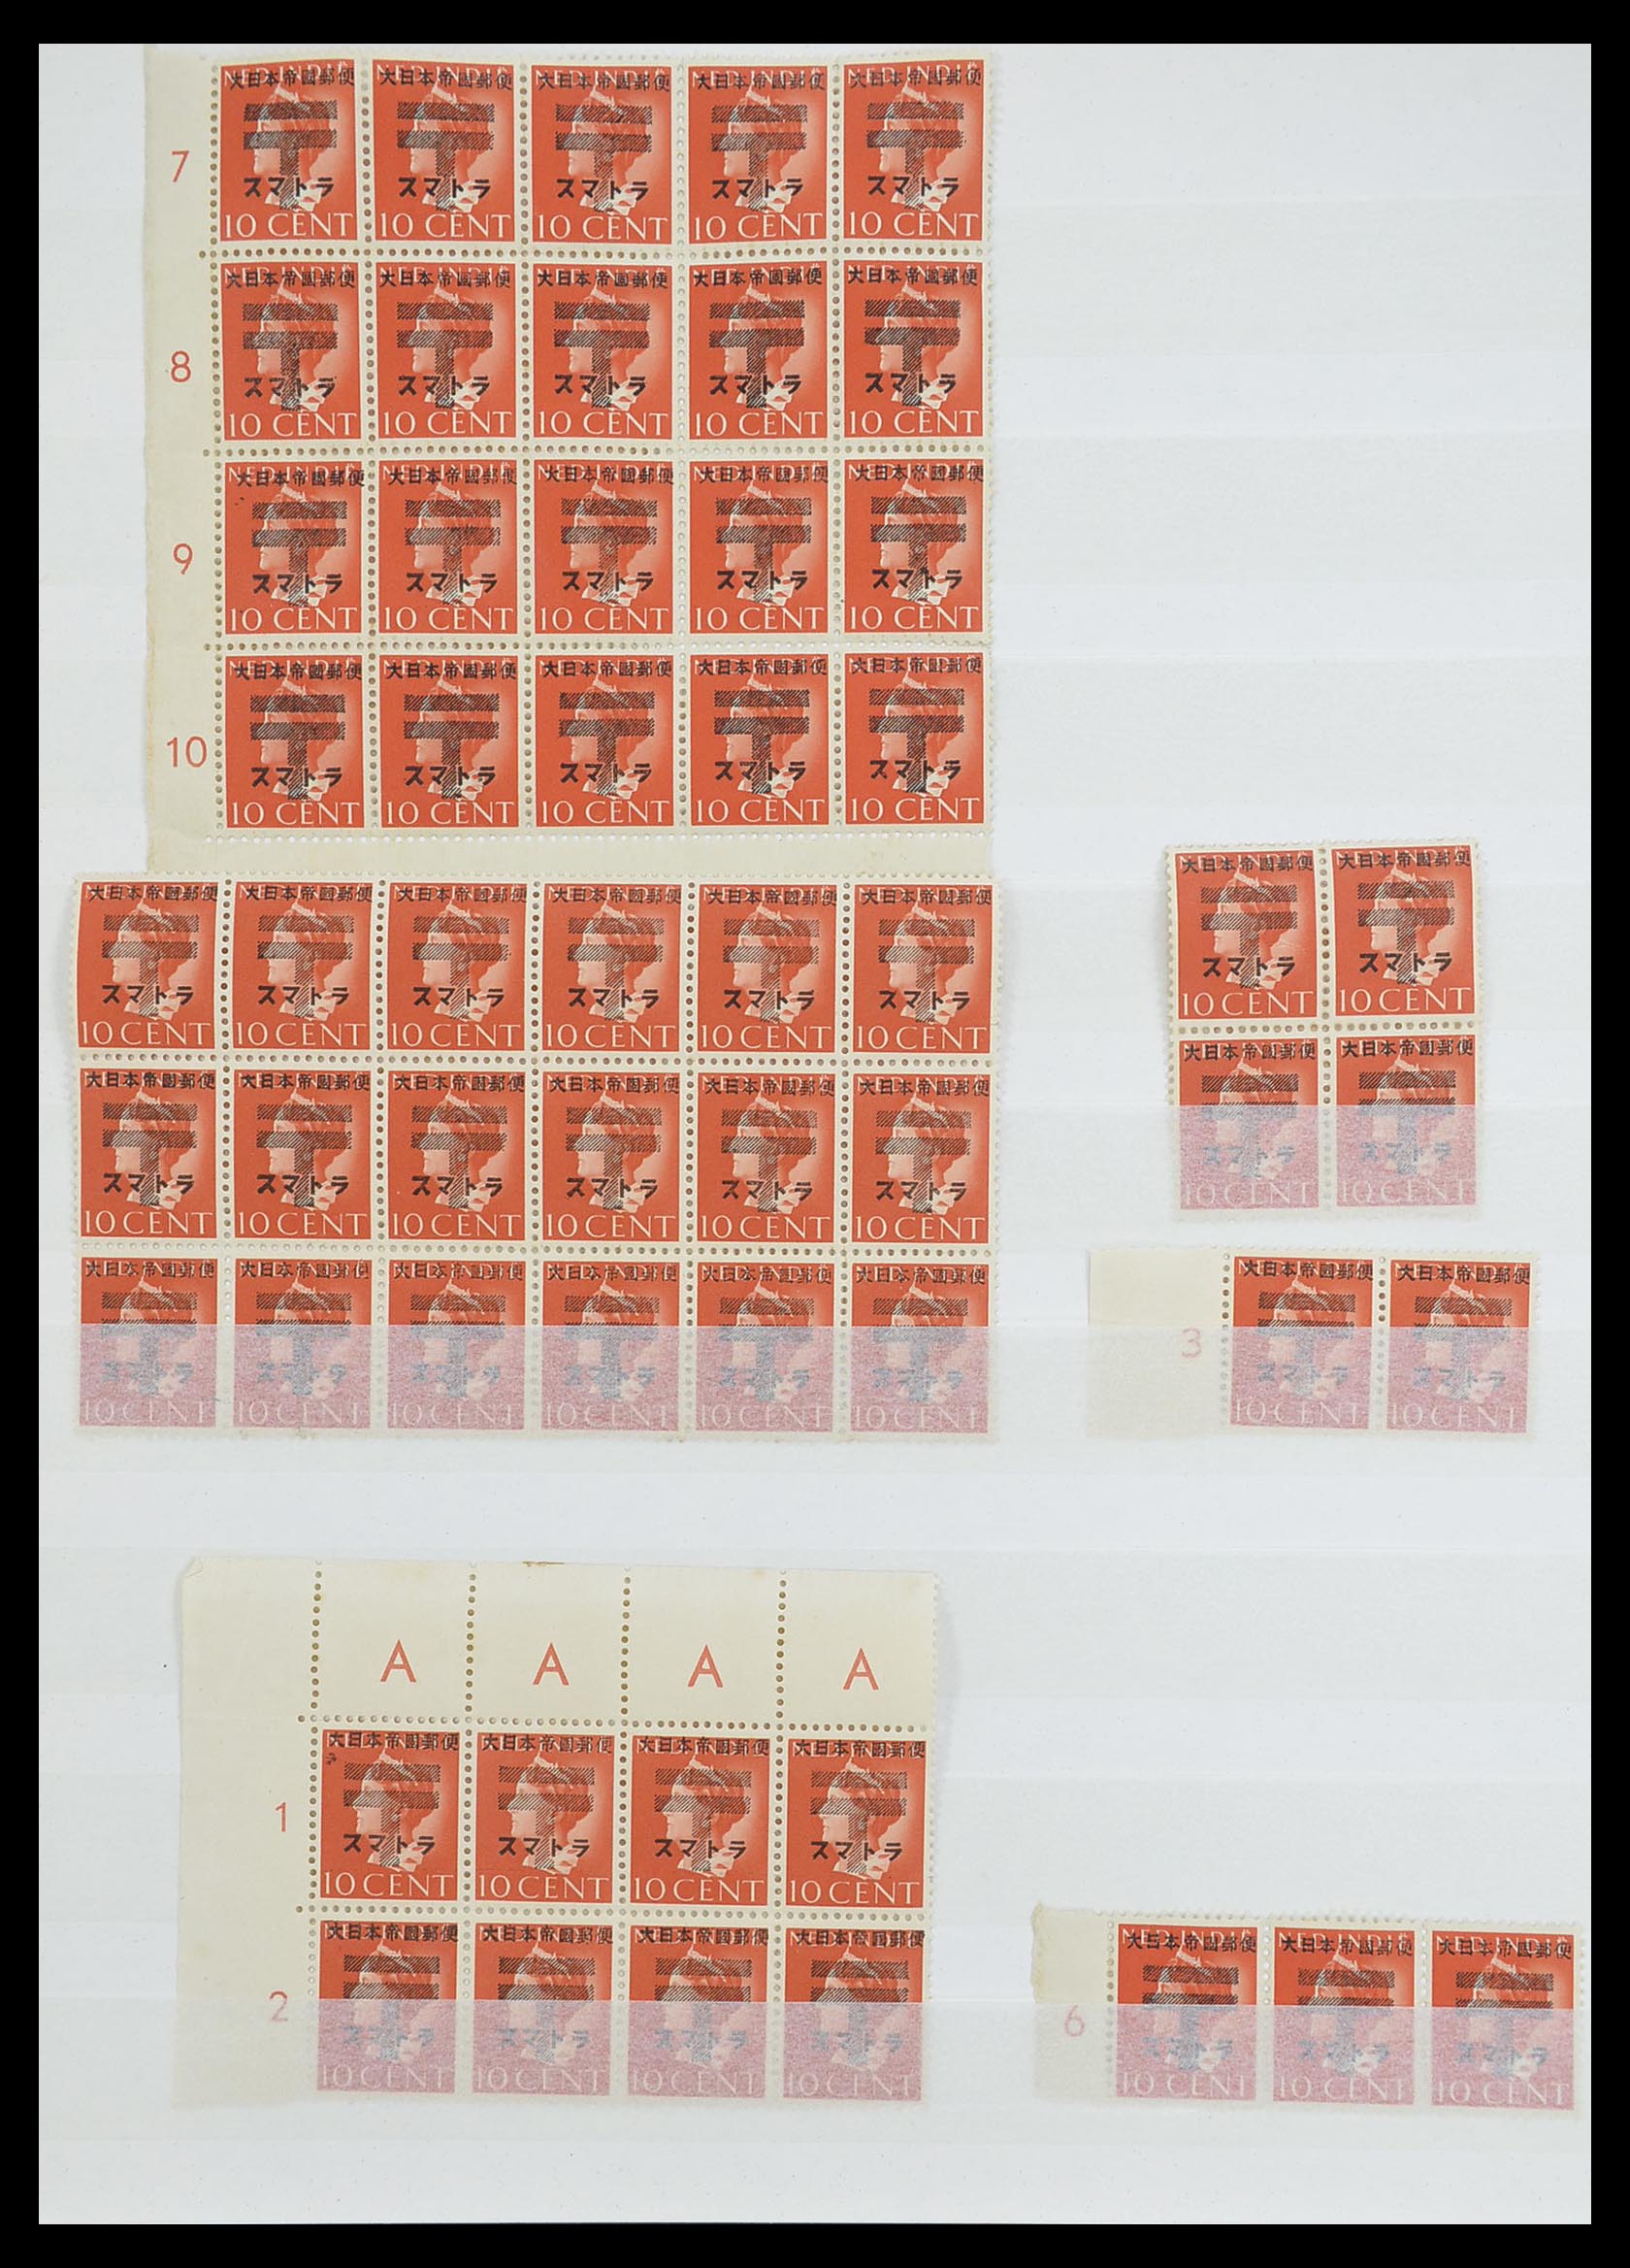 33489 010 - Stamp collection 33489 Japanese occupation Dutch east Indies and interim